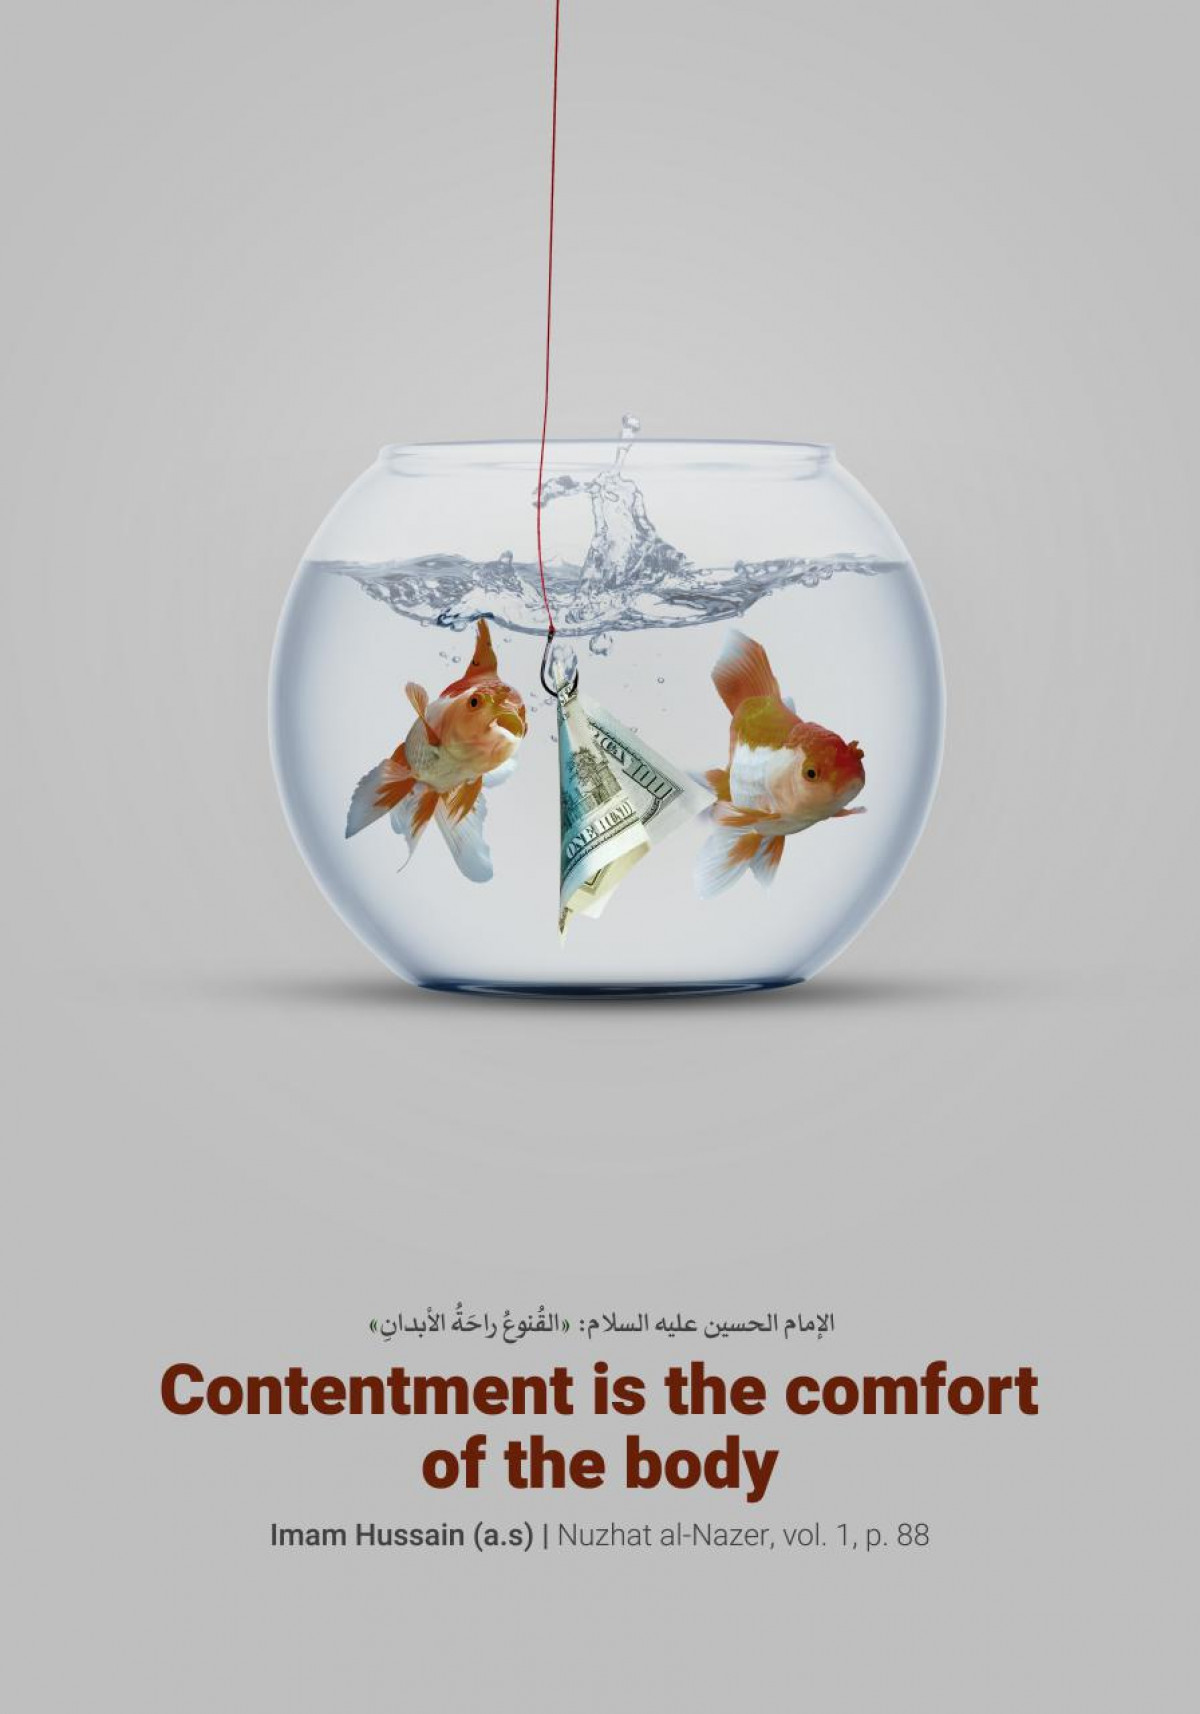 Contentment is the comfort of the body